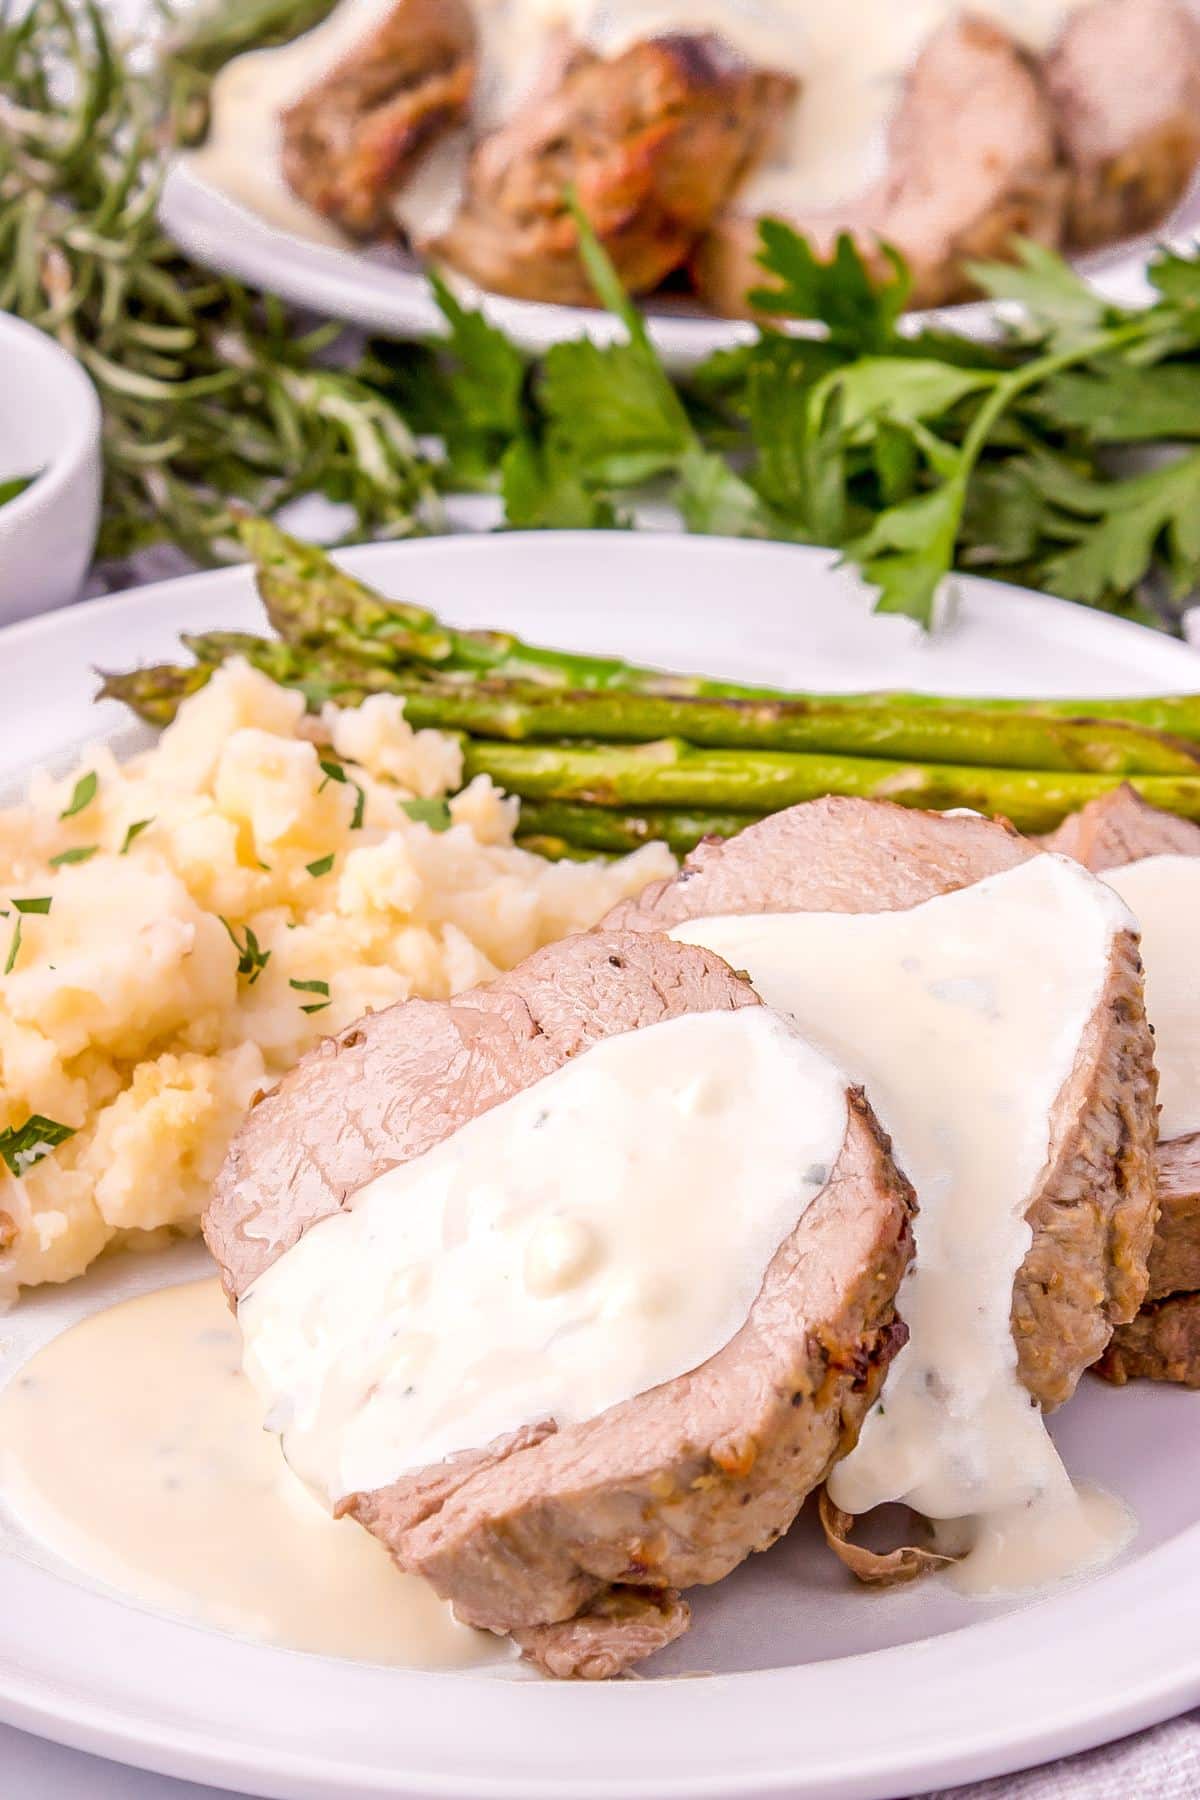 Beef tenderloin slices drizzled with Gorgonzola sauce, mashed potatoes and asparagus.